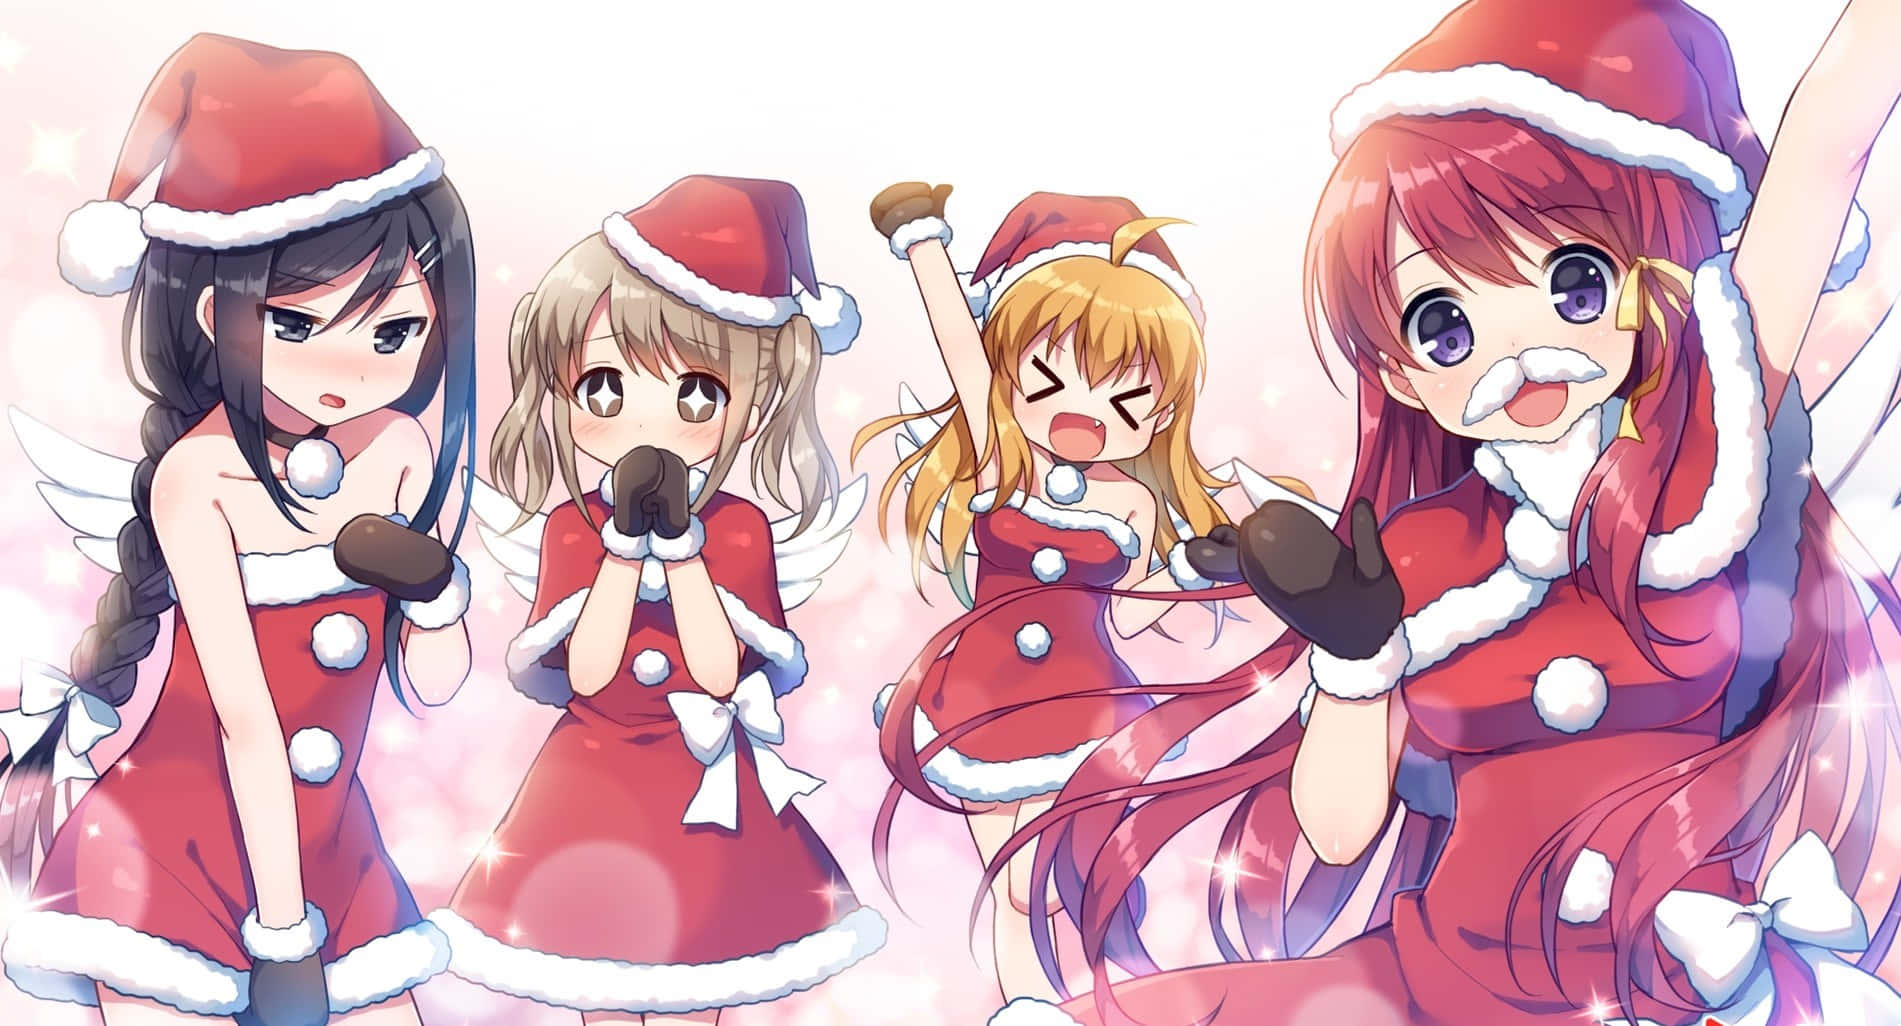 Christmas comes early with this Anime style festive background